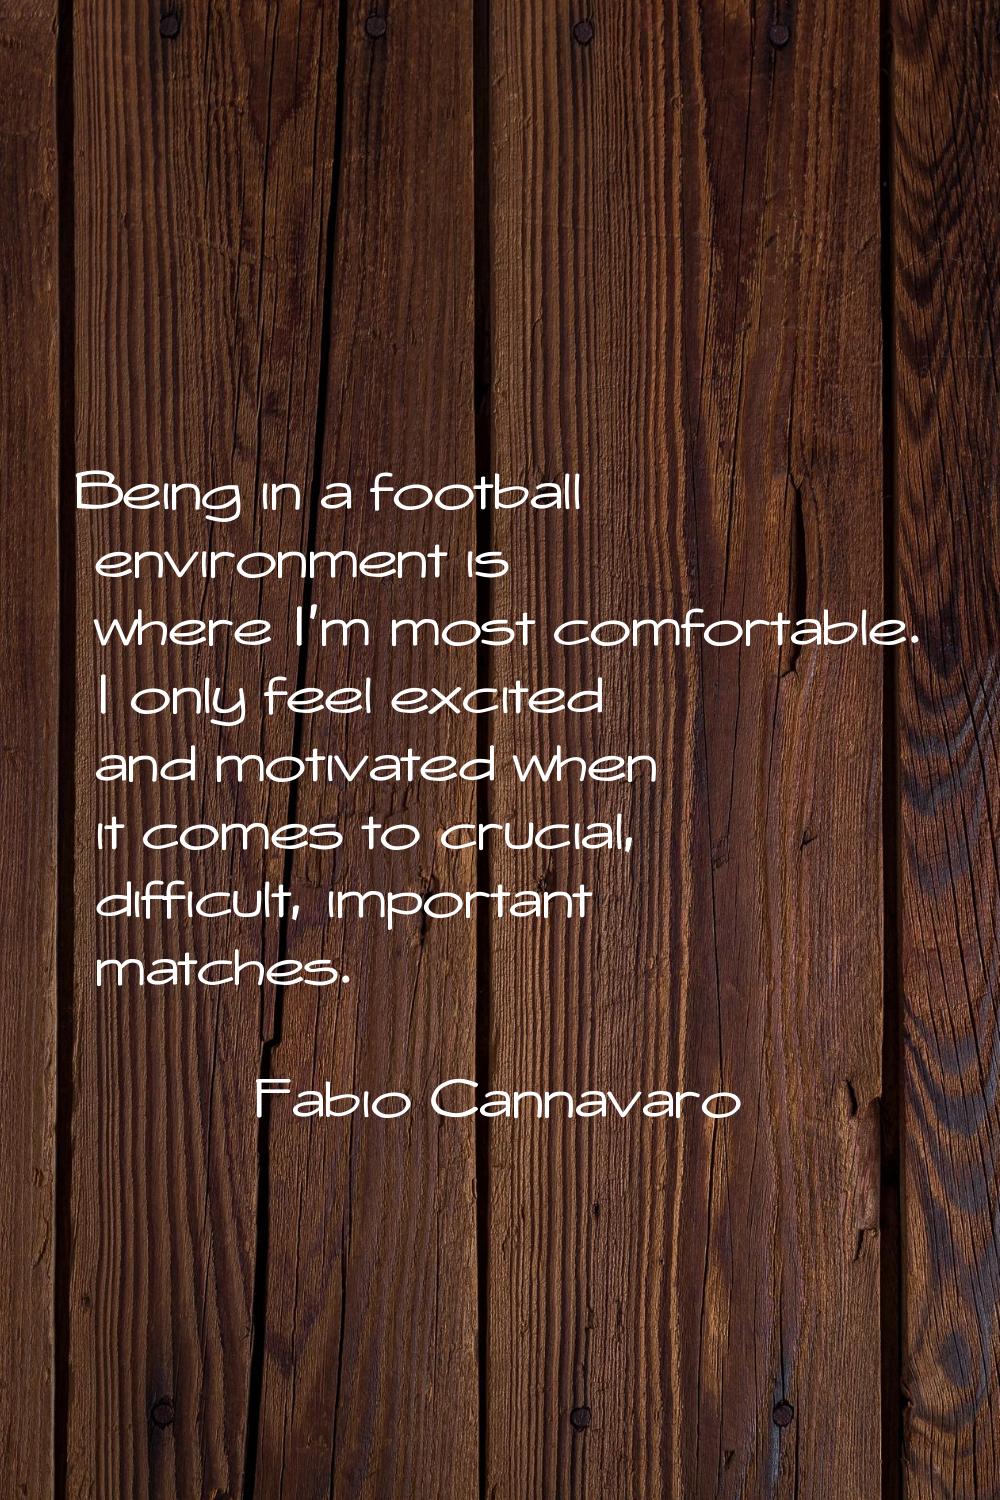 Being in a football environment is where I'm most comfortable. I only feel excited and motivated wh